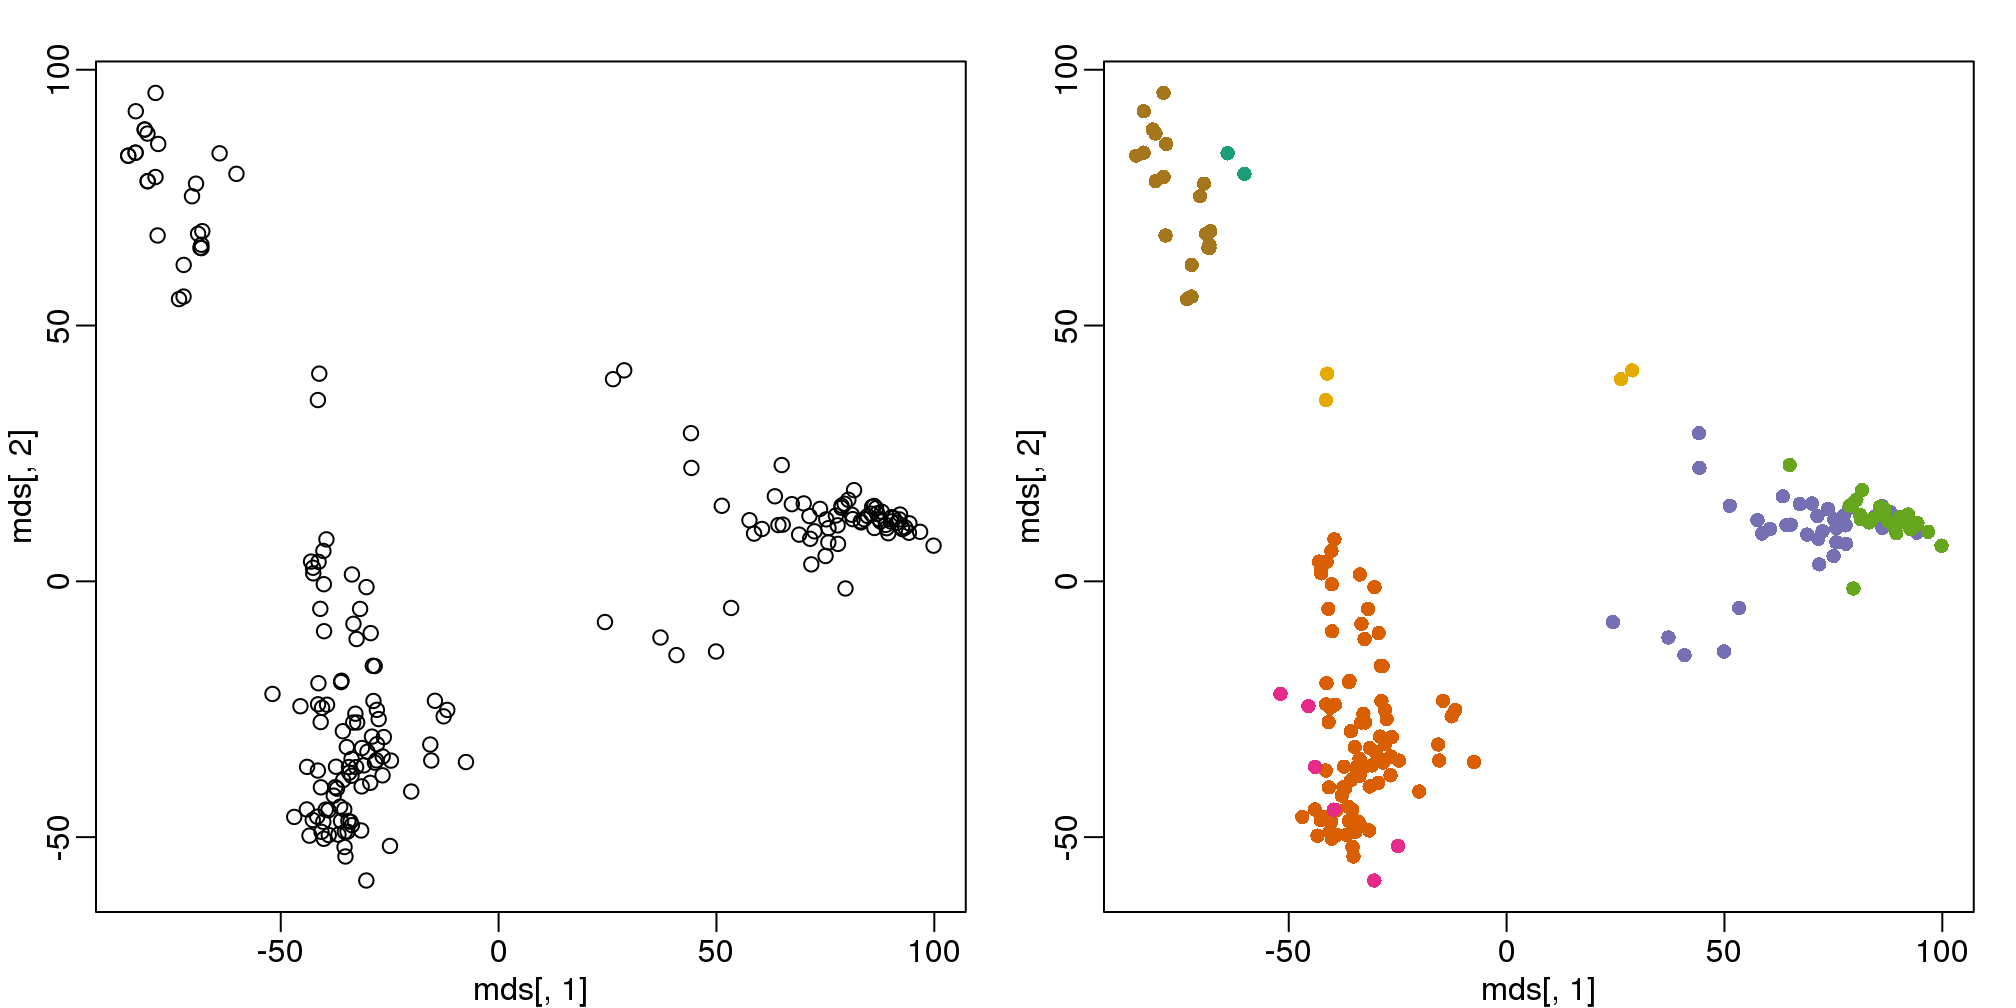 Plot of gene expression for first two PCs with color representing tissues (left) and clusters found using all genes (right).